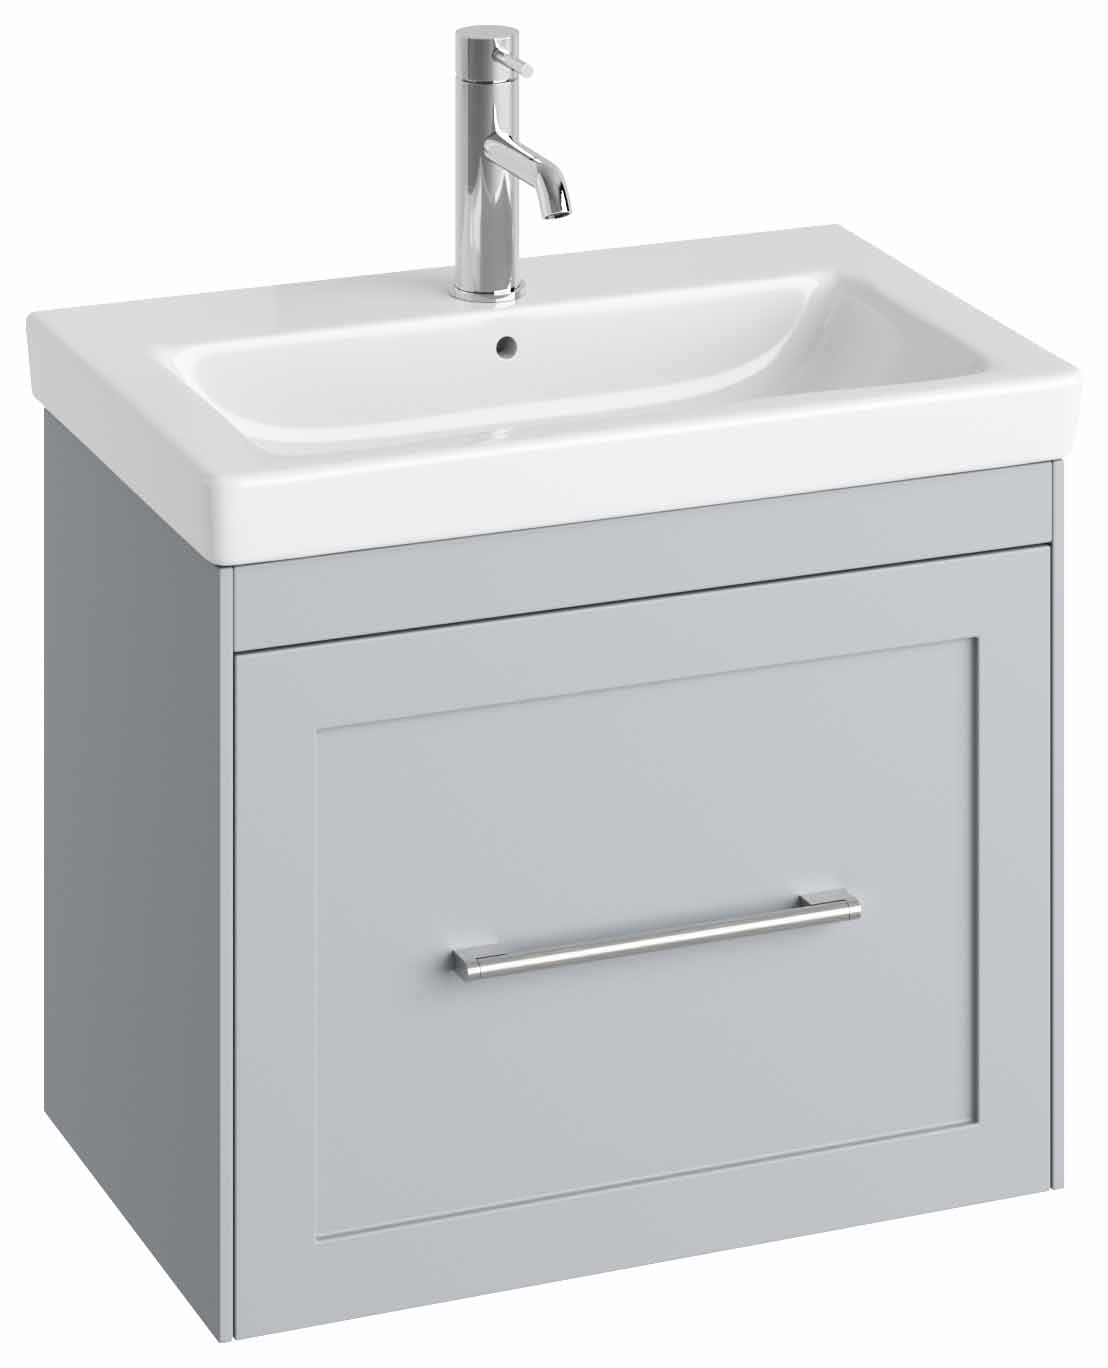 Image of Abacus Concept Stone Grey Shaker Wall Hung Vanity Unit & Basin - 550mm